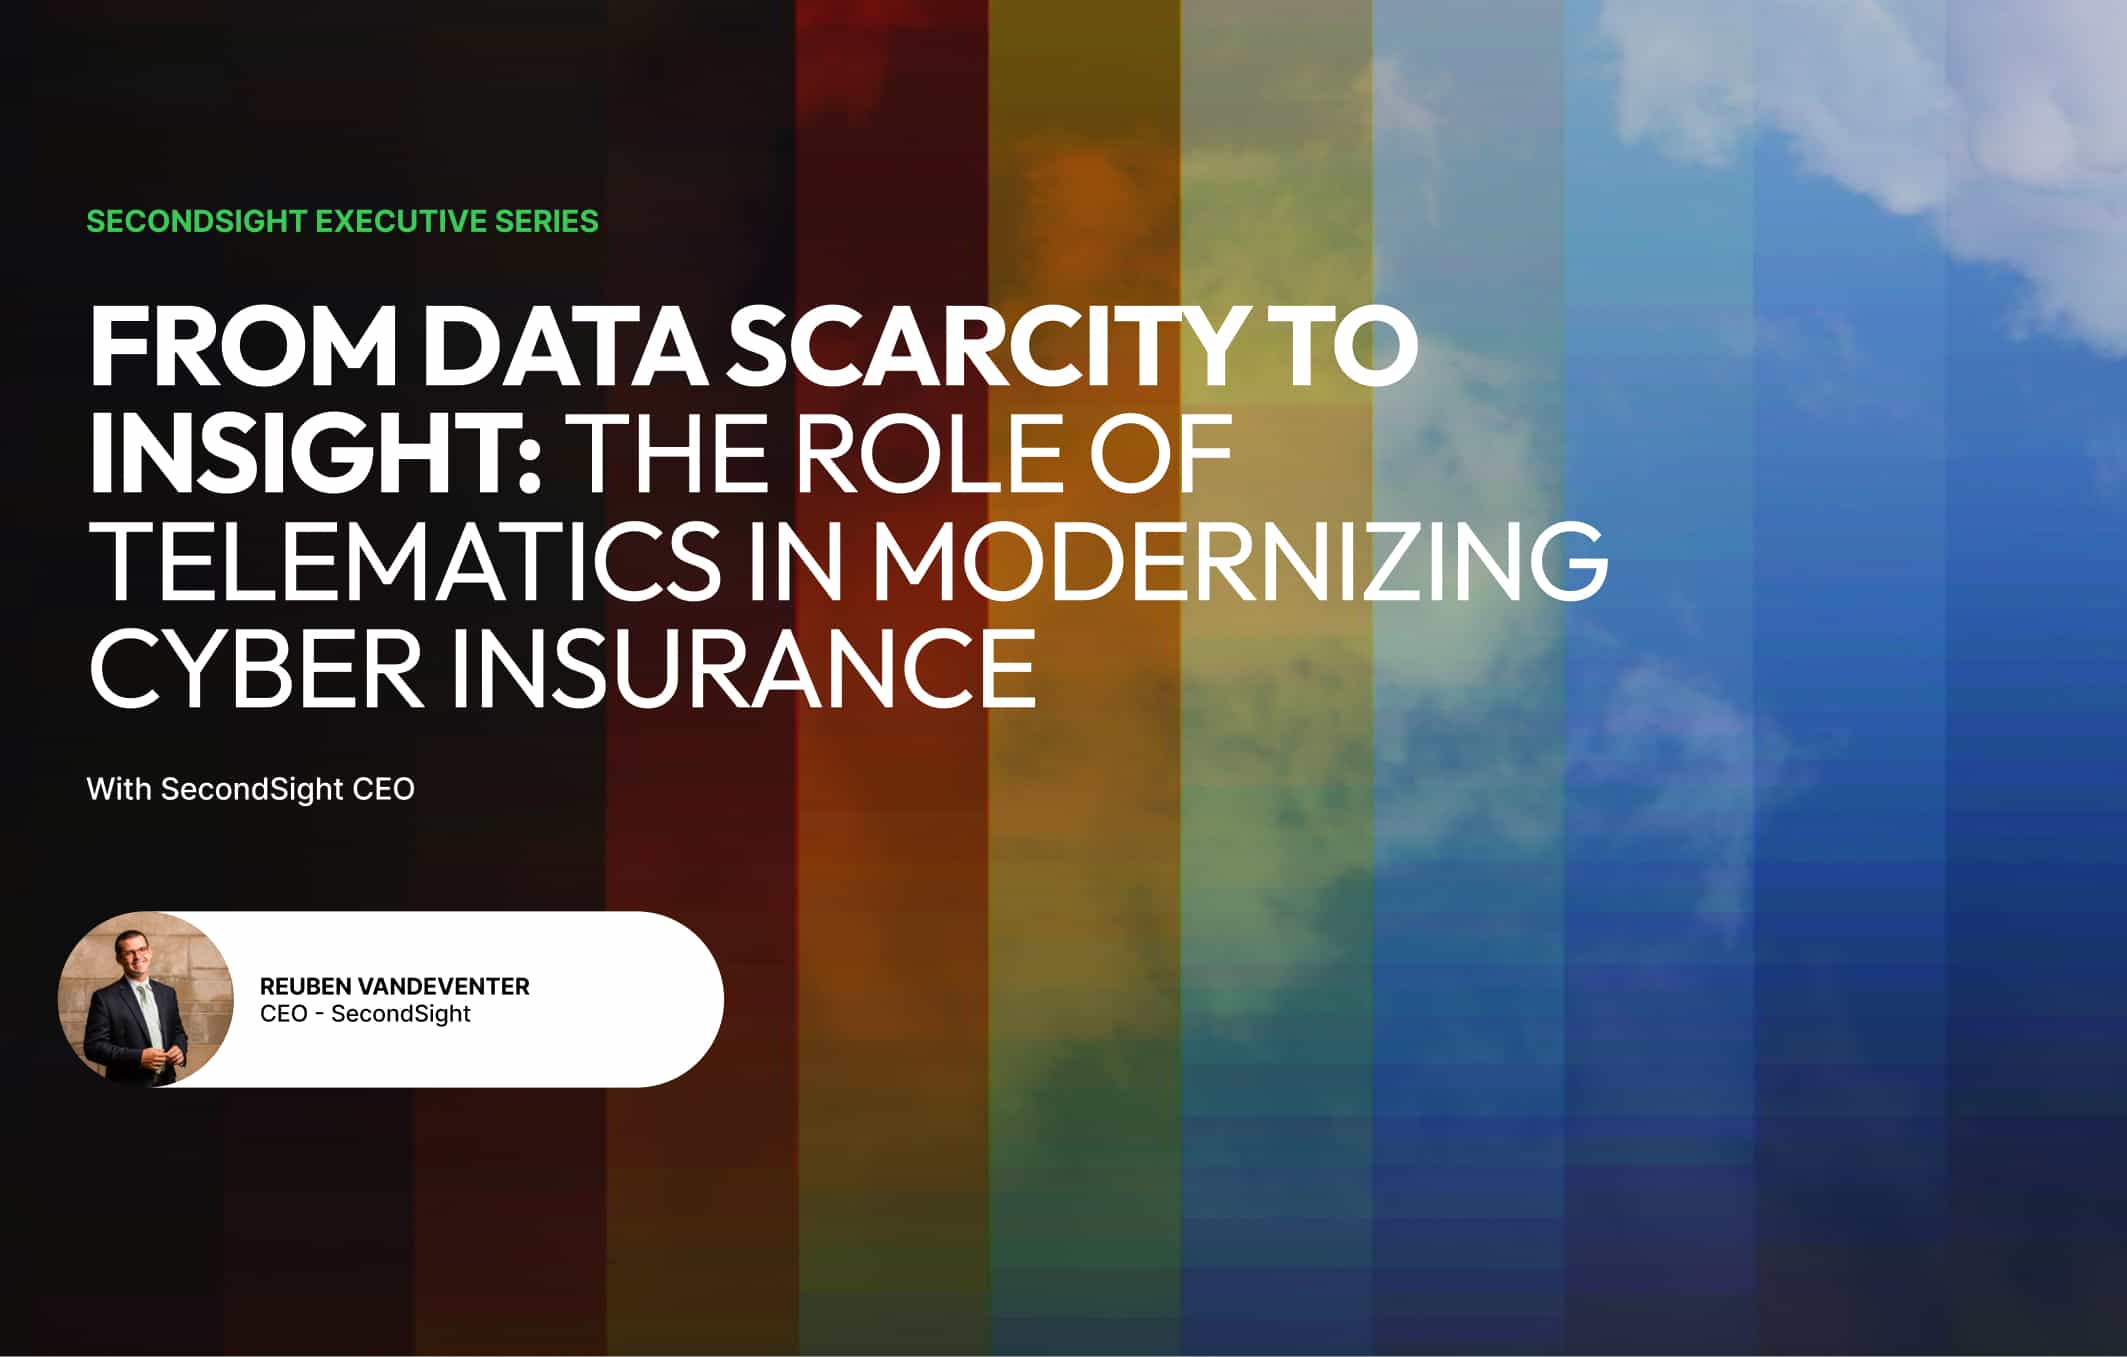 From Data Scarcity to Insight: The Role of Telematics in Modernizing Cyber Insurance